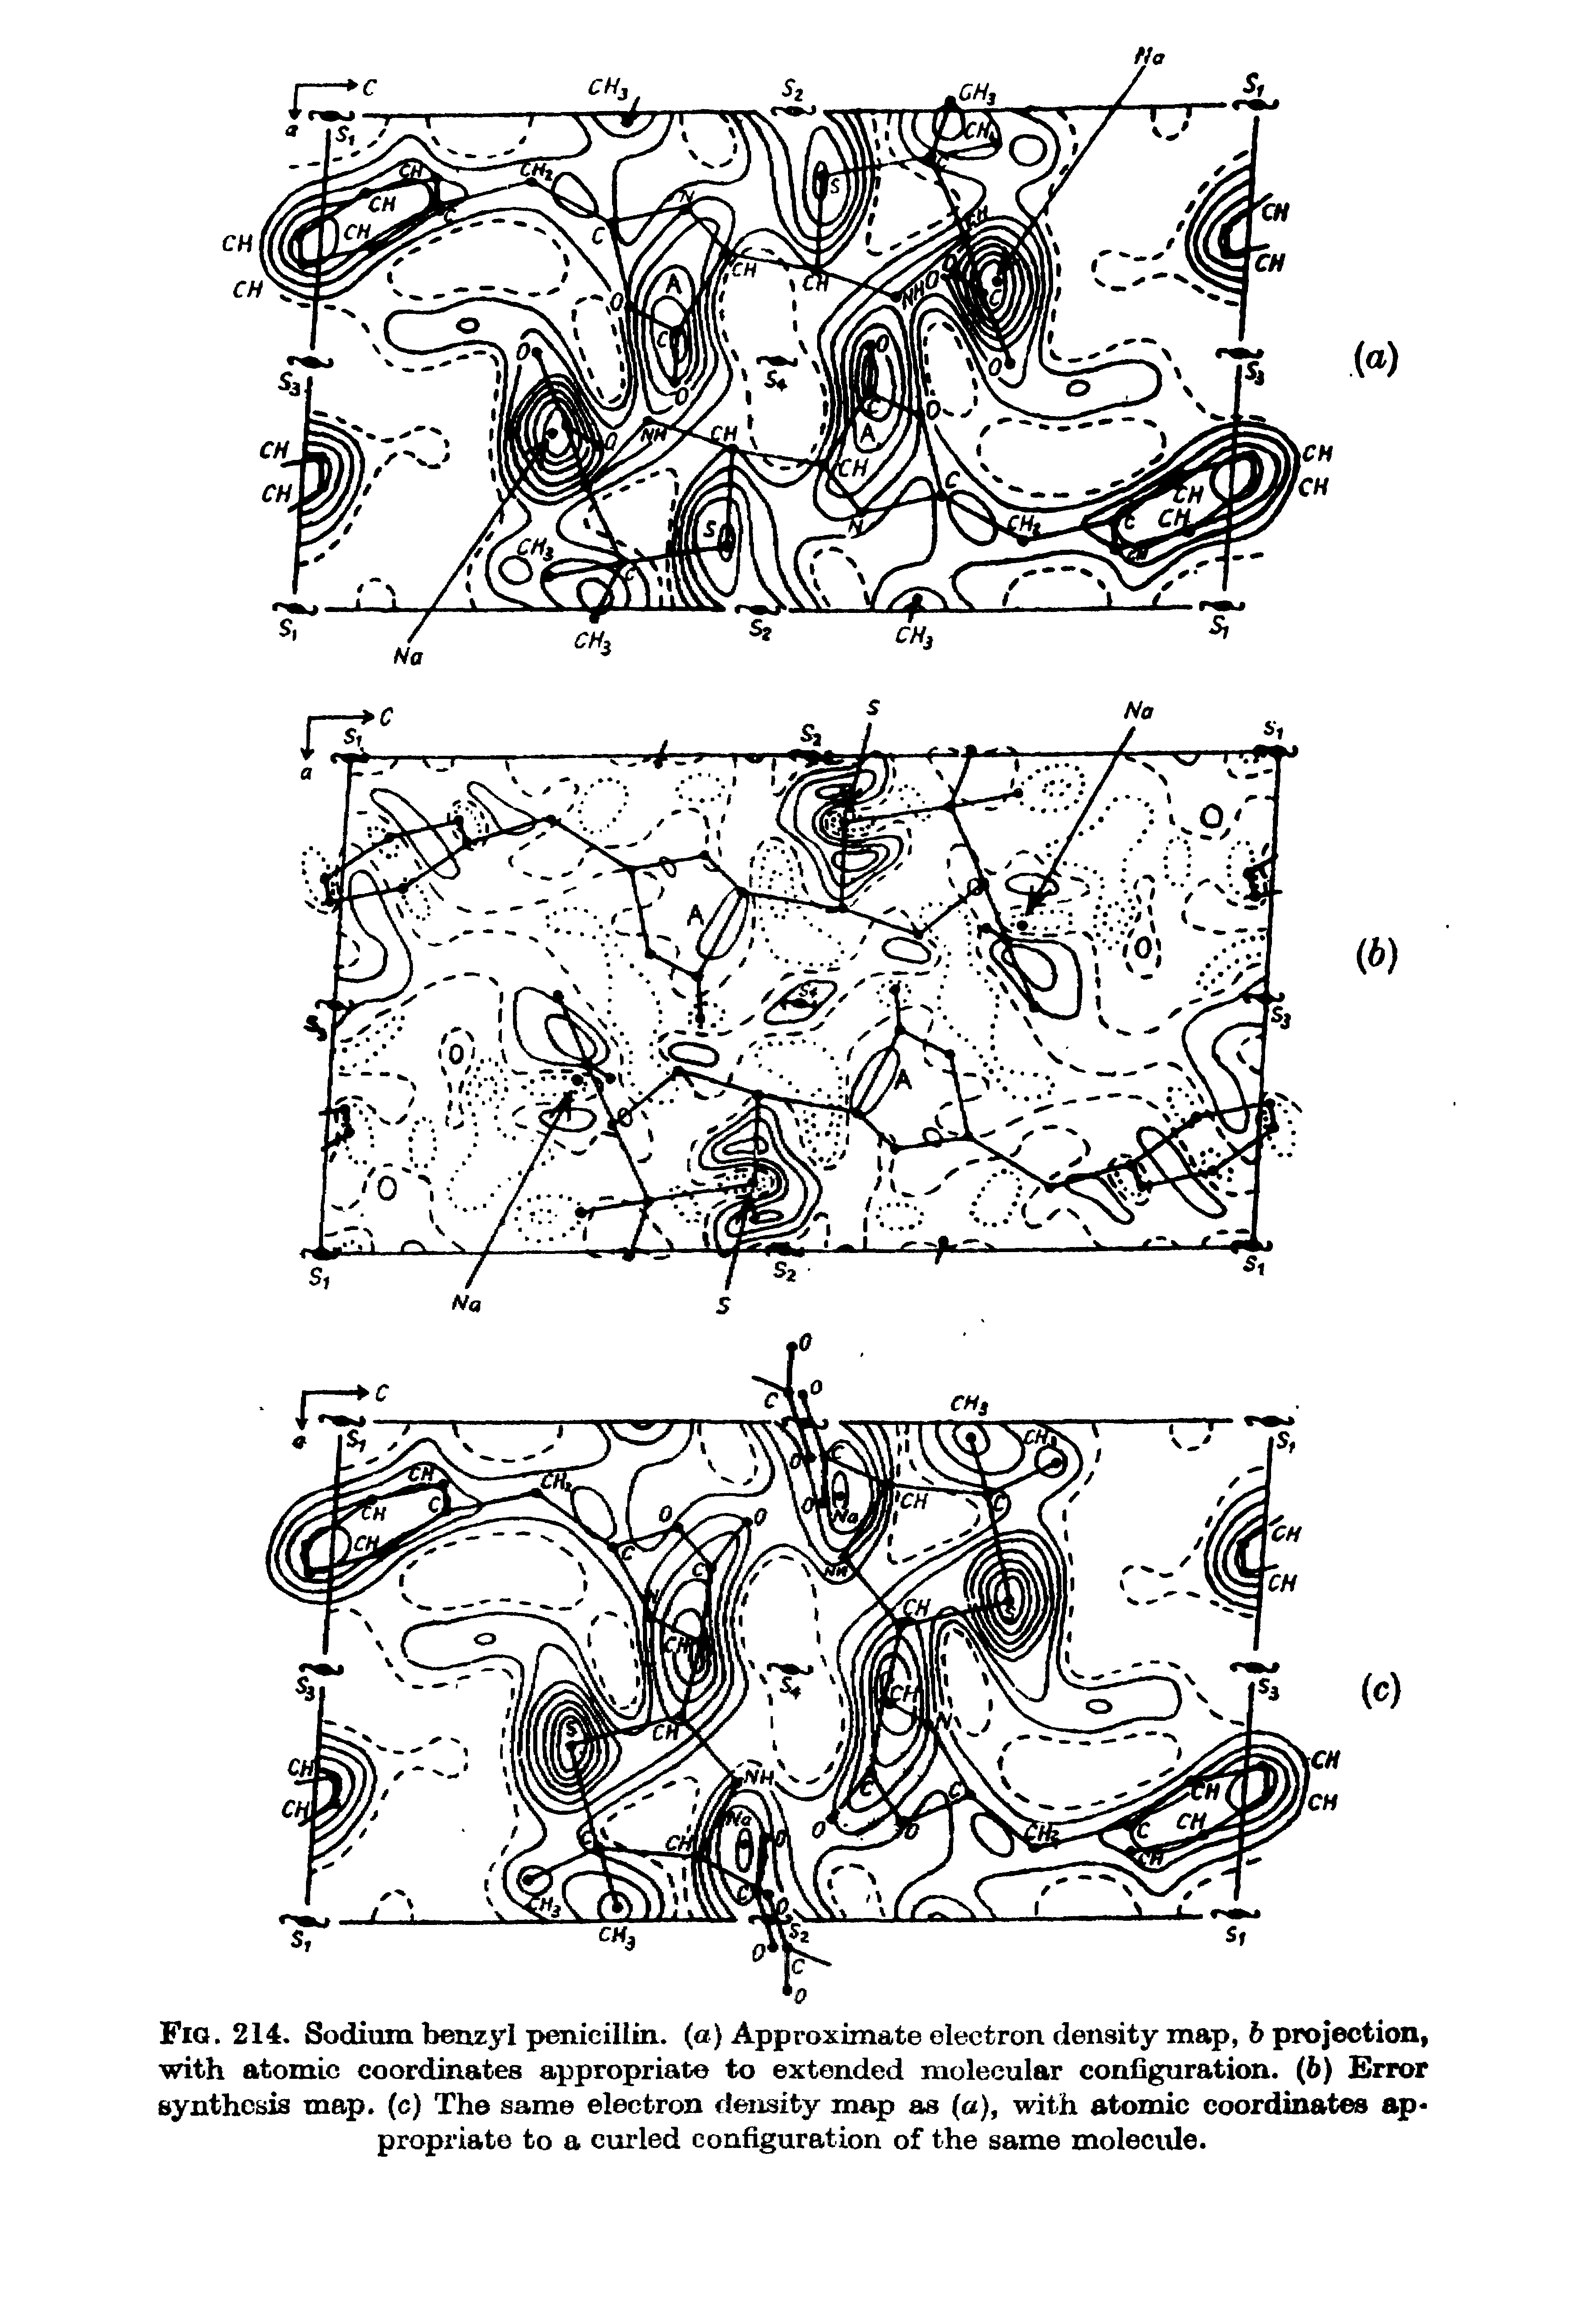 Fig. 214. Sodium benzyl penicillin, (a) Approximate electron density map, b projection, with atomic coordinates appropriate to extended molecular configuration. (6) Error synthesis map. (c) The same electron density map as (a), with atomic coordinates appropriate to a curled configuration of the same molecule.